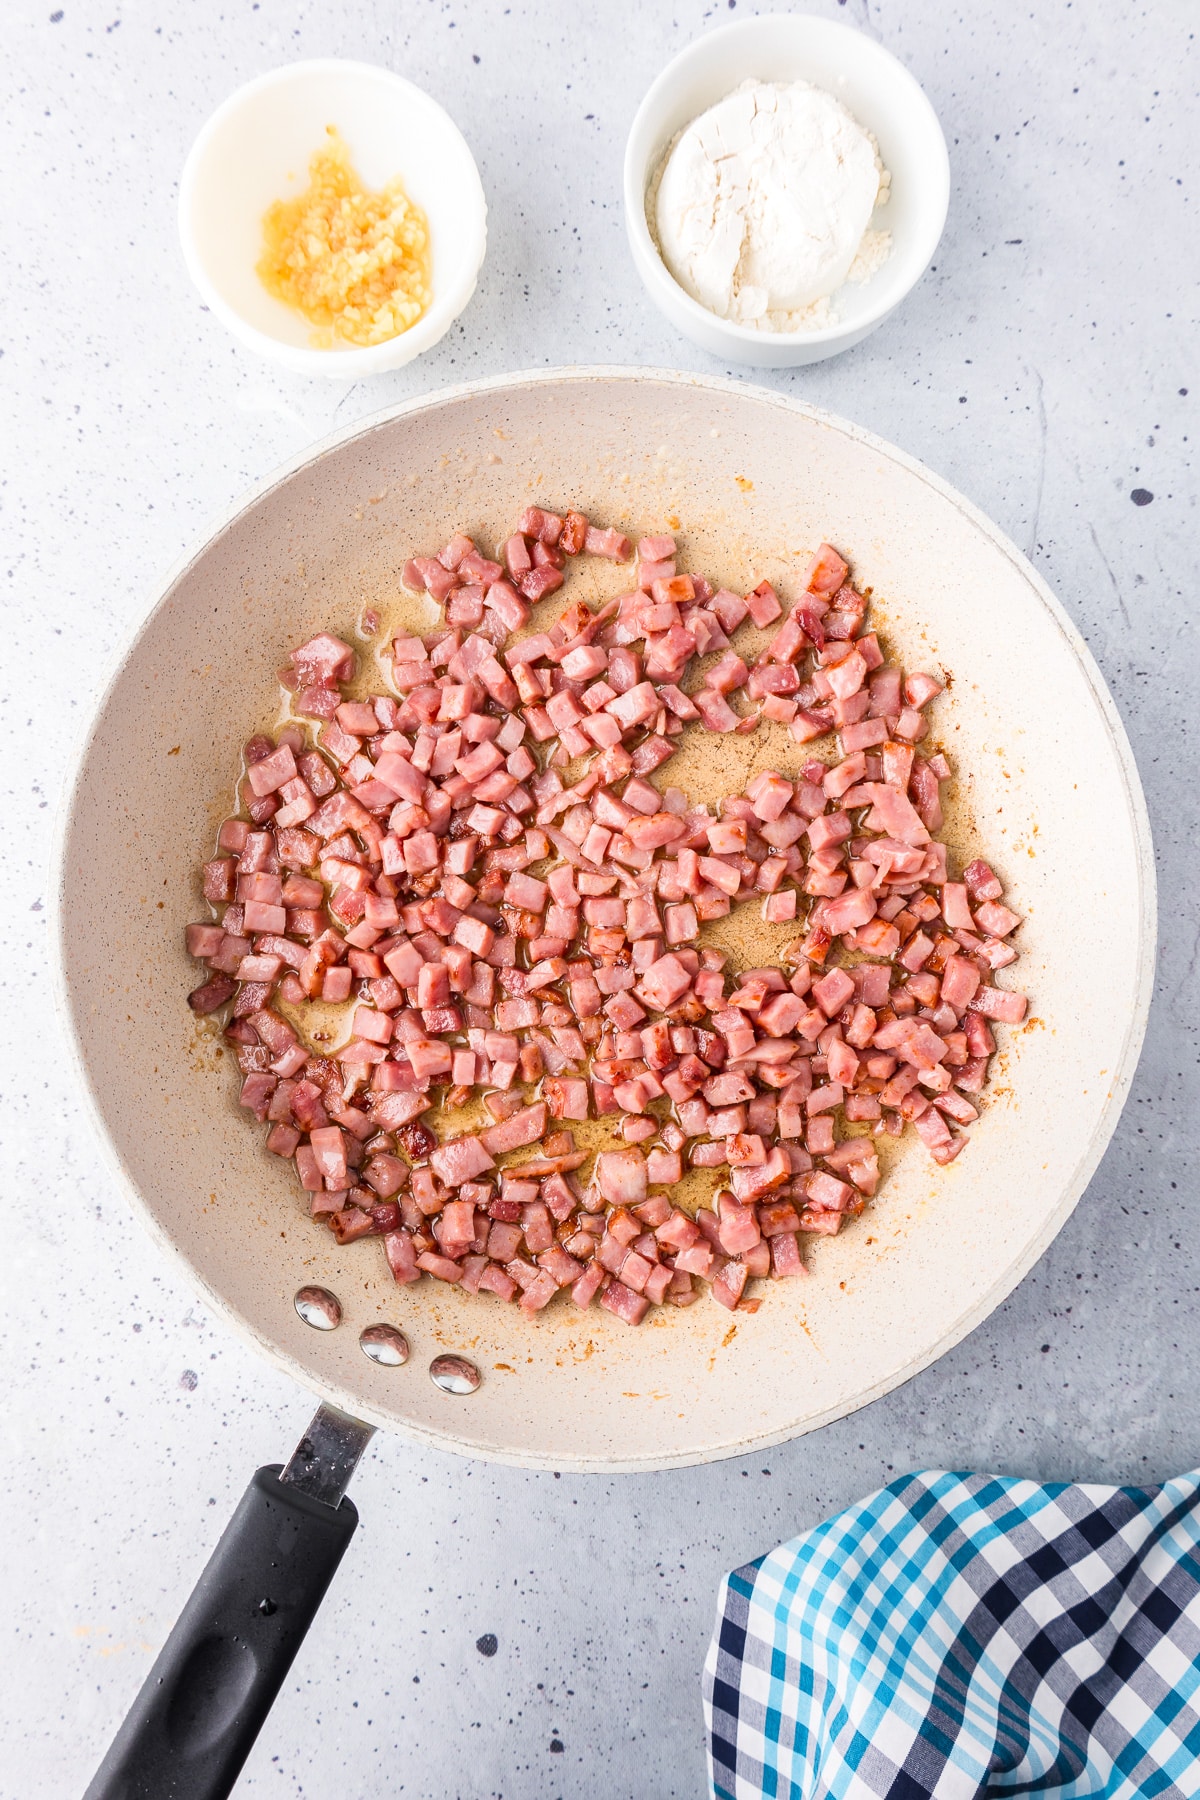 Diced ham being browned in a medium frying pan with flour and minced garlic nearby on the counter in bowls.